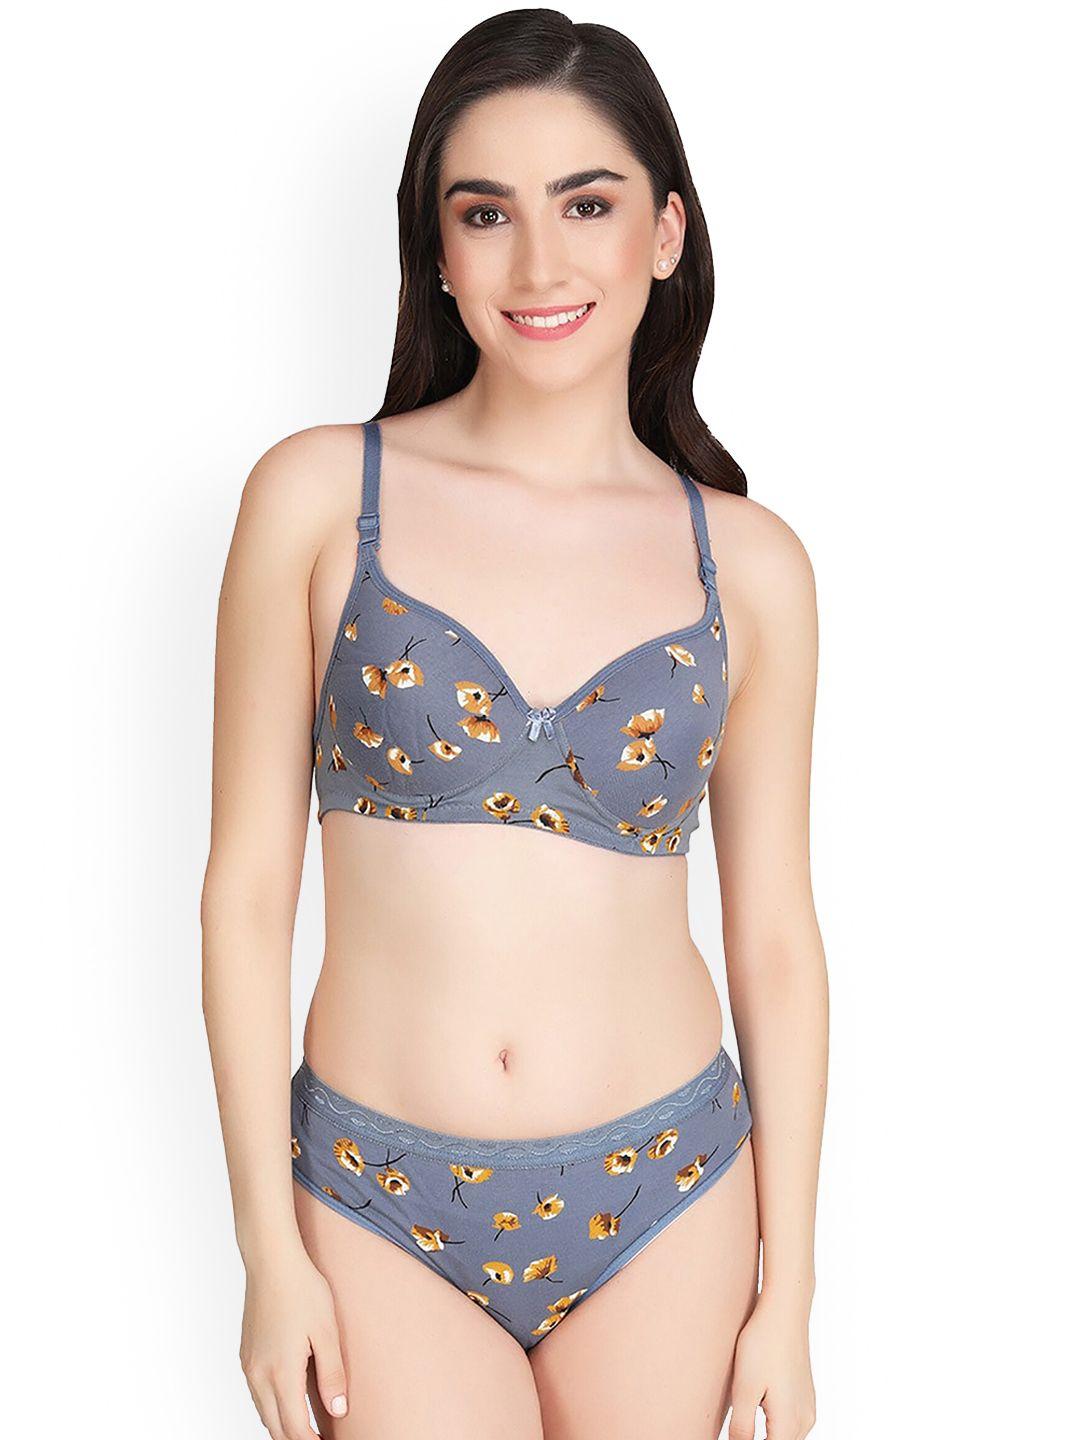 arousy printed cotton lingerie set